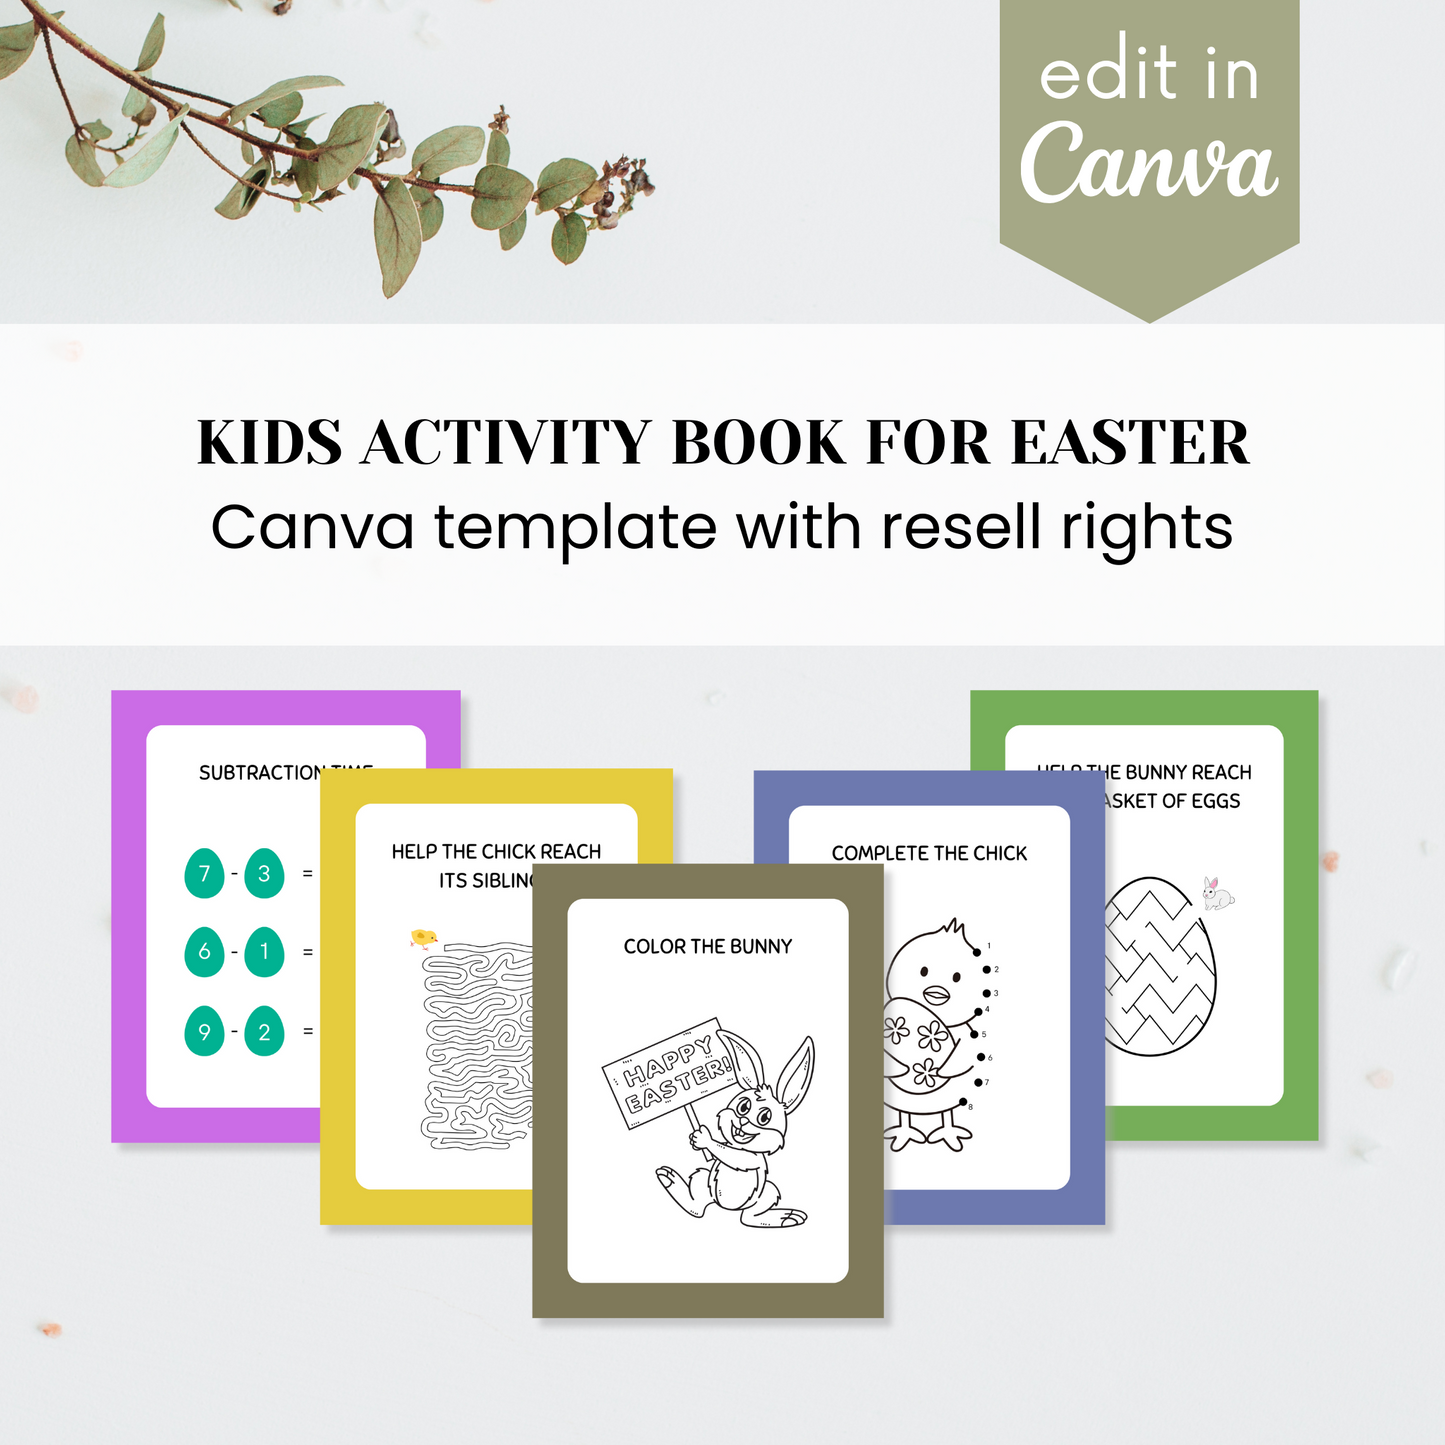 Kids Activity Book for Easter Template